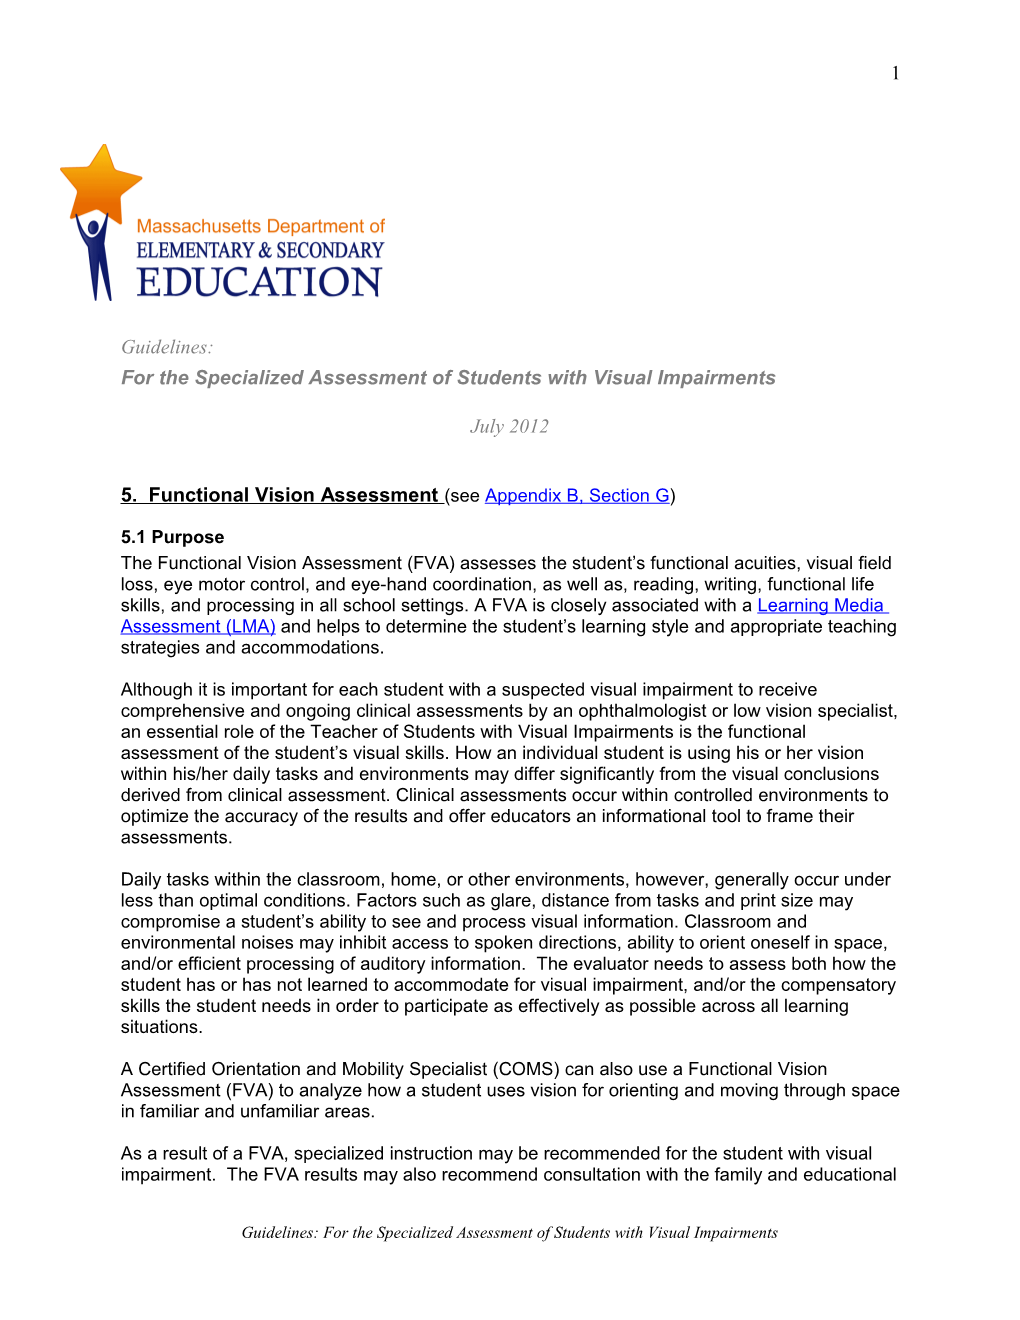 Functional Vision Assessment - Guidelines: for the Specialized Assessment of Students With